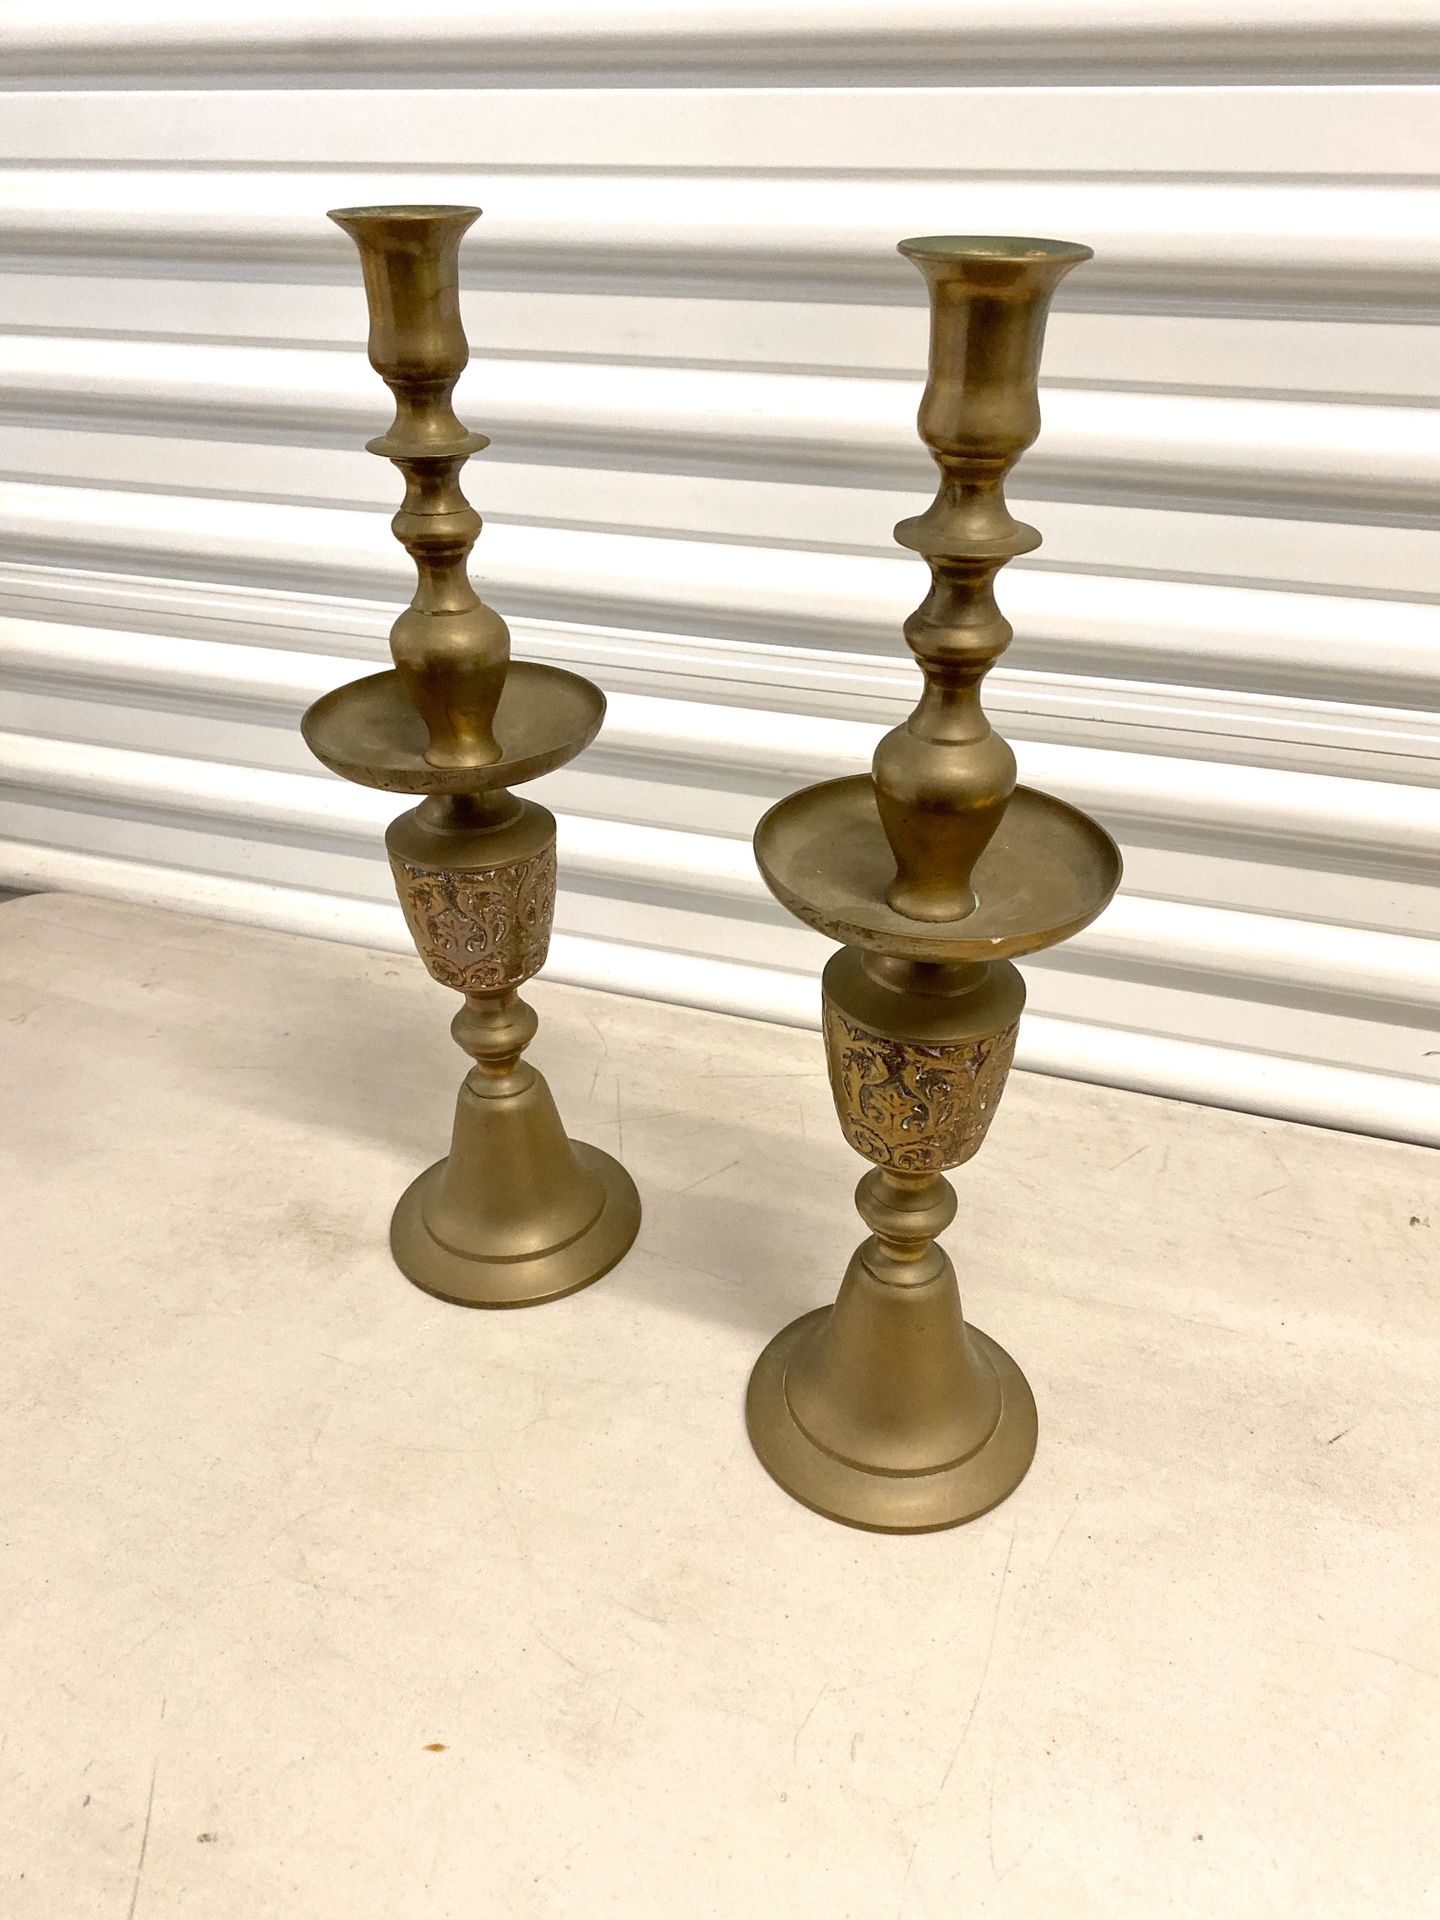 Vintage Brass Candle Holder (candlestick) Pair